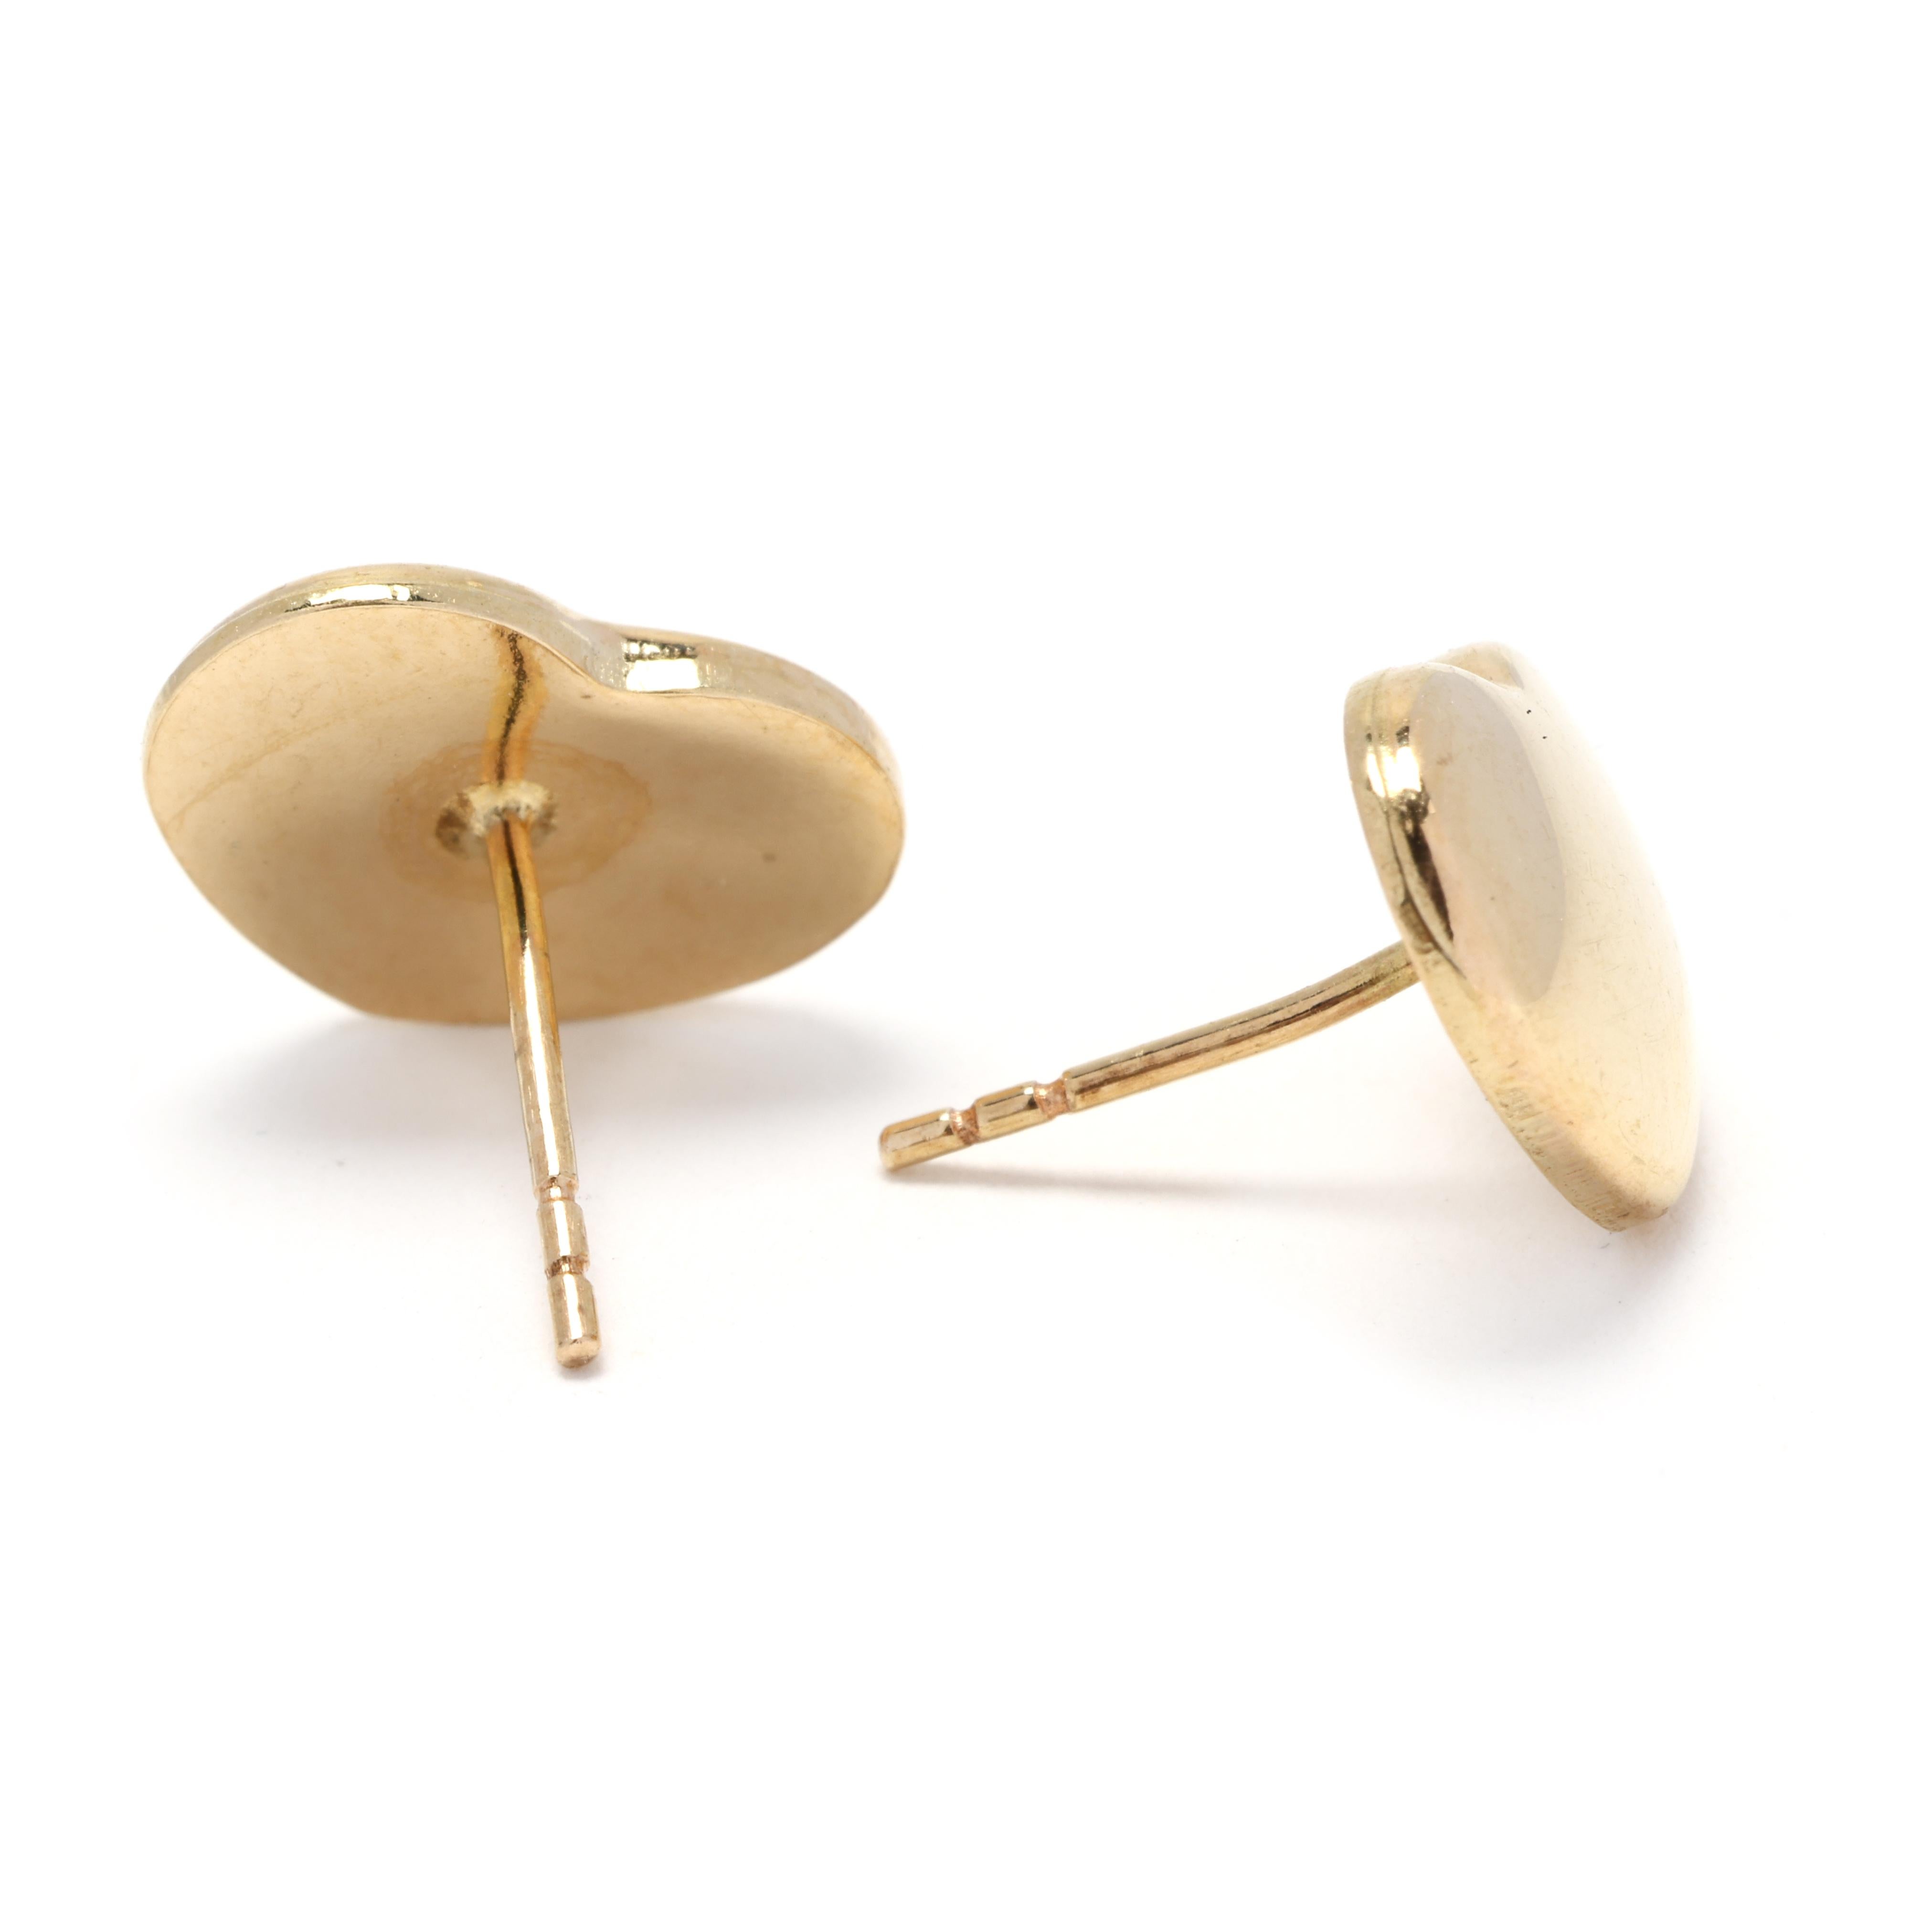 These 14k yellow gold heart earrings are both dainty and lovely. Crafted with high-quality gold, these earrings feature a delicate heart-shaped design that adds a touch of romance to any outfit. The earrings are lightweight and comfortable to wear,